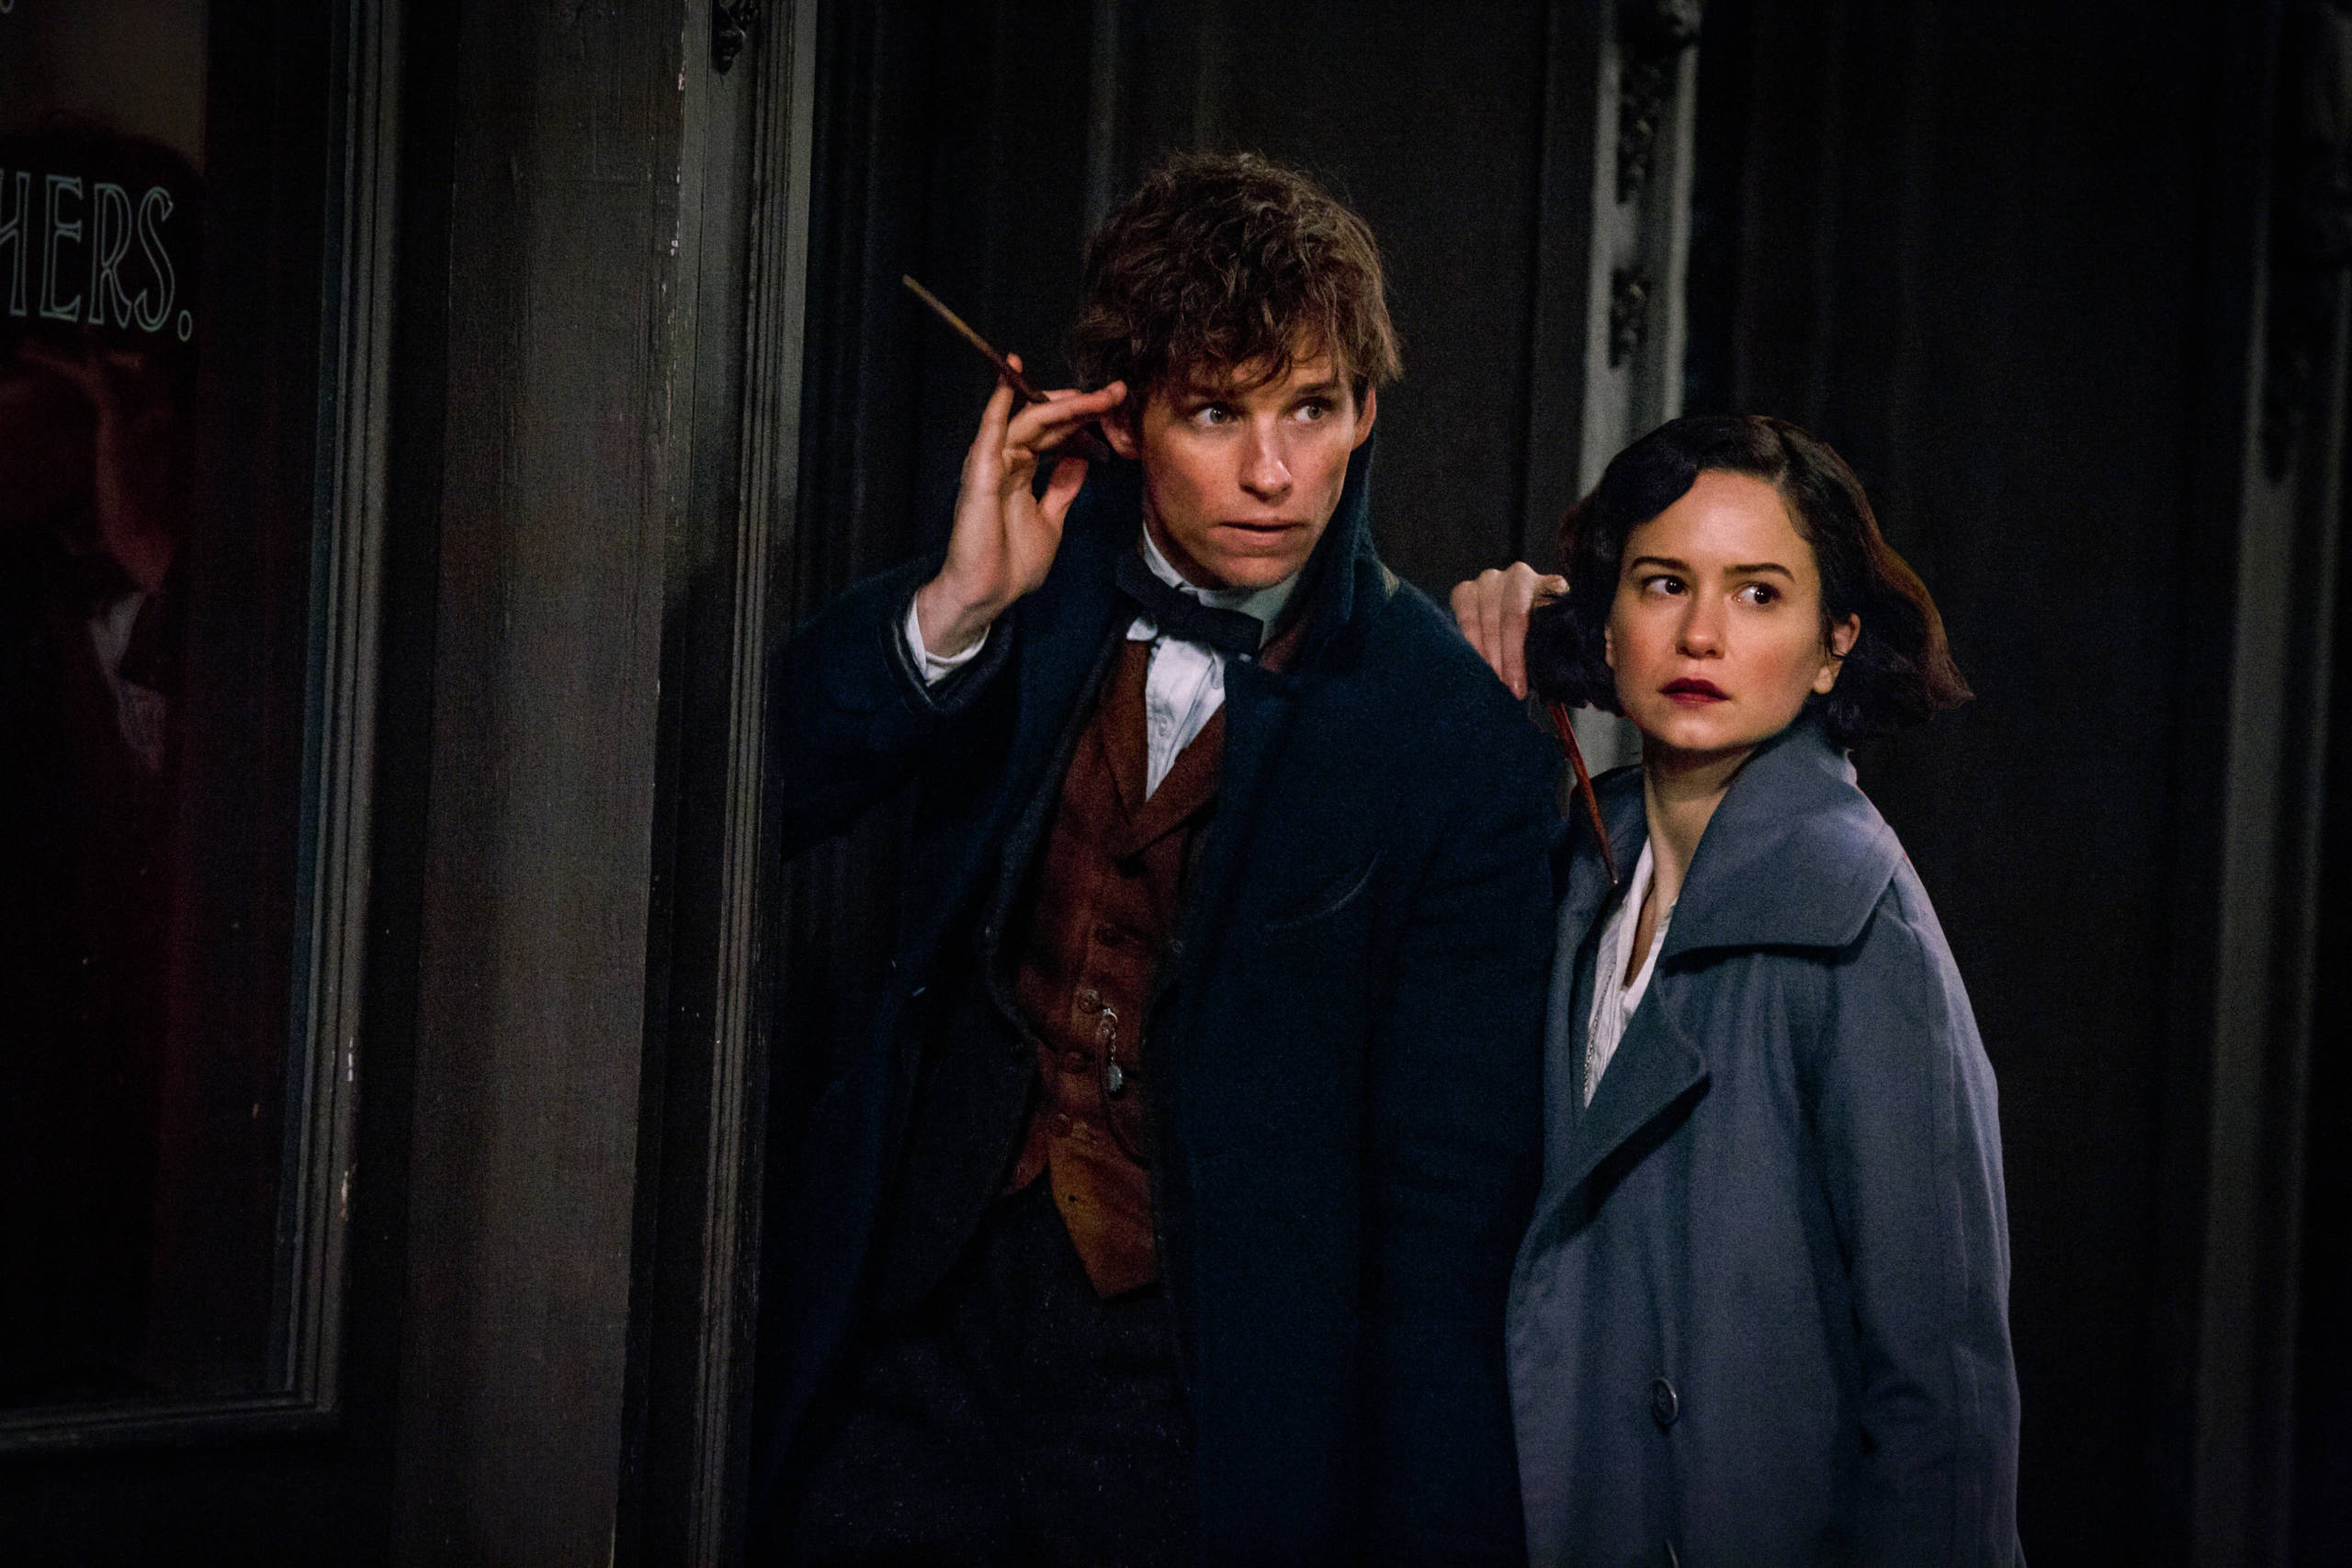 Newt Scamander and Tina Goldstein, played by Eddie Redmayne and Katherine Waterston, stand with their wands raised for action